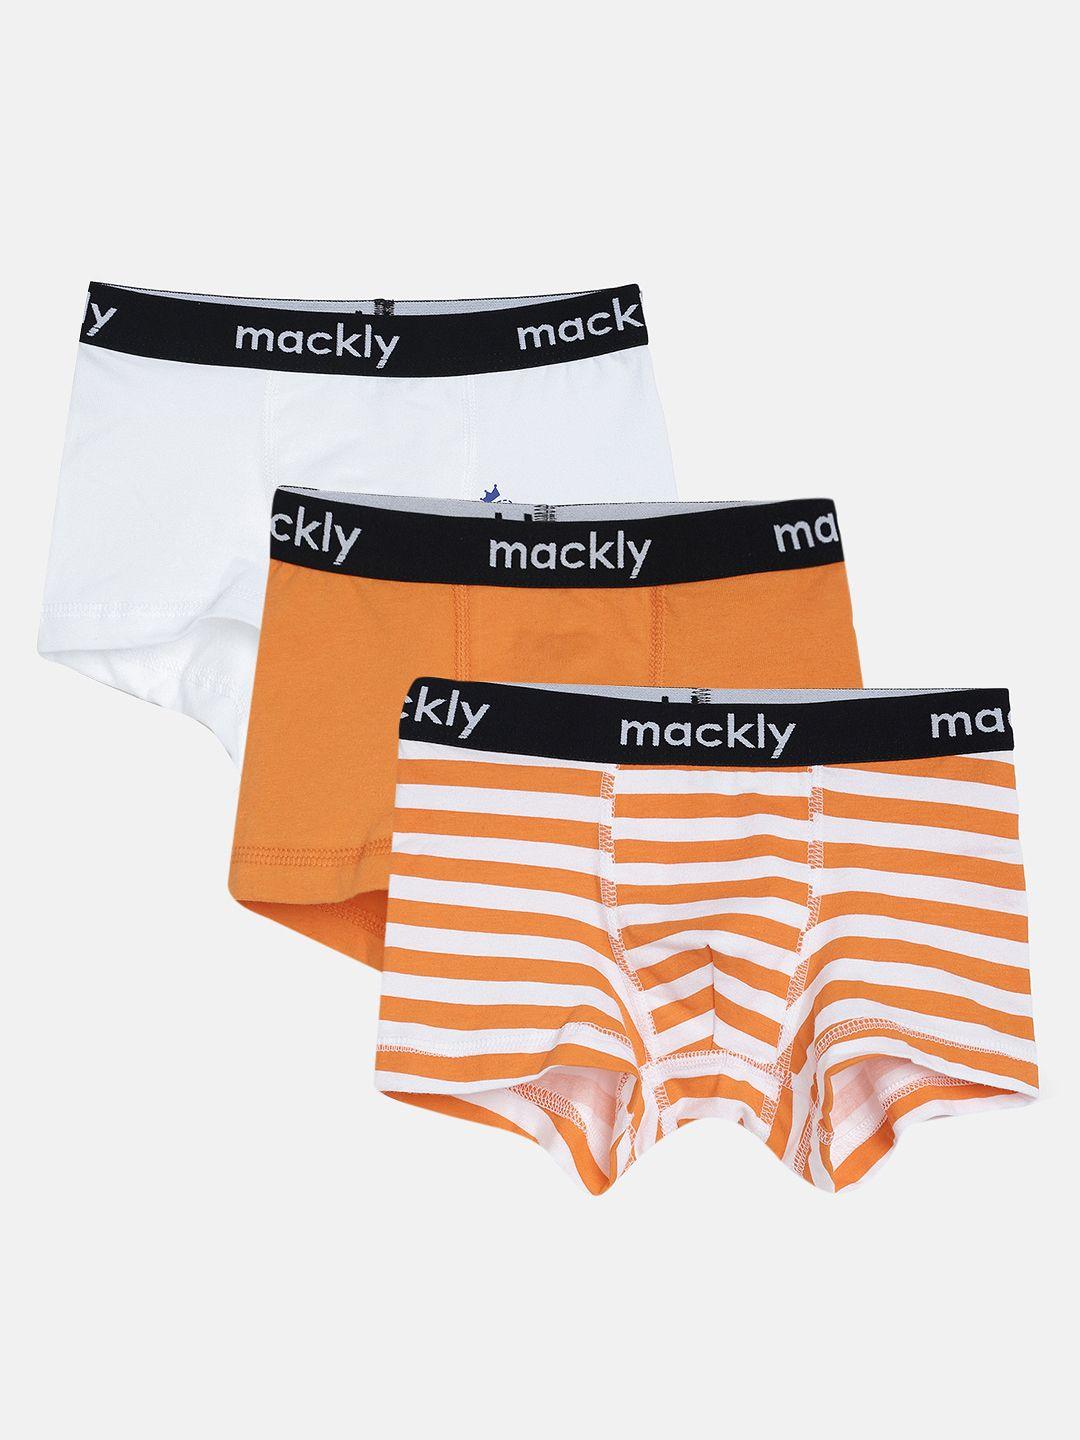 mackly boys pack of 3 trunks mb-18